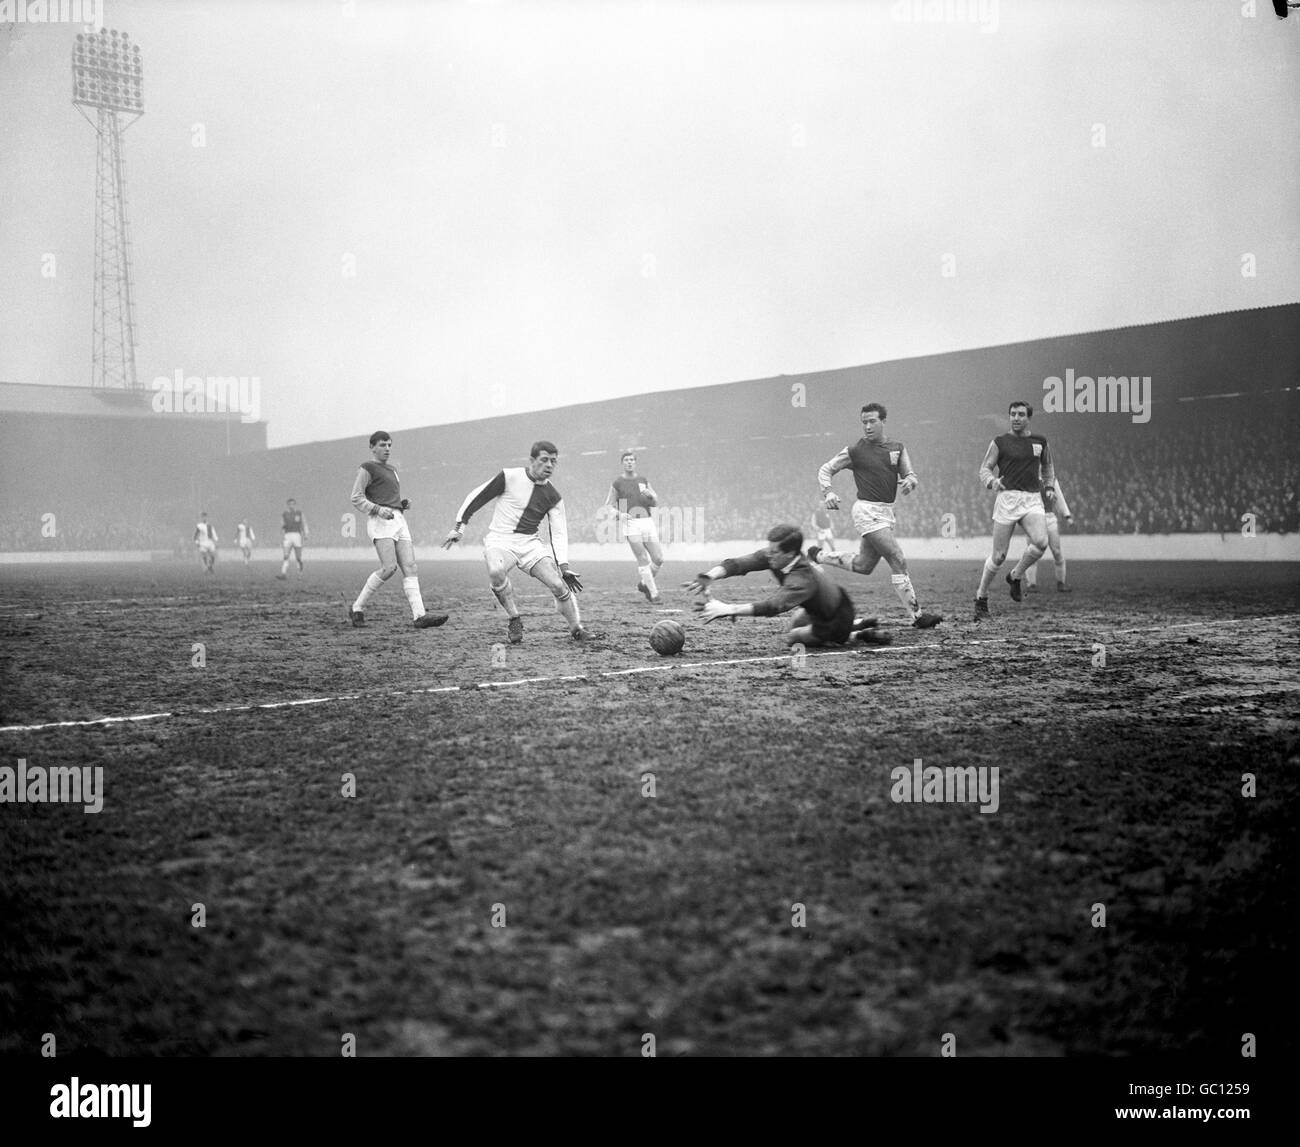 West Ham United goalkeeper Jim Standen (third r) dives at the feet of Blackburn Rovers' Andy McEvoy (second l), watched by teammates Martin Peters (l), Jack Burkett (third l), Ken Brown (second r) and John Bond (r) Stock Photo